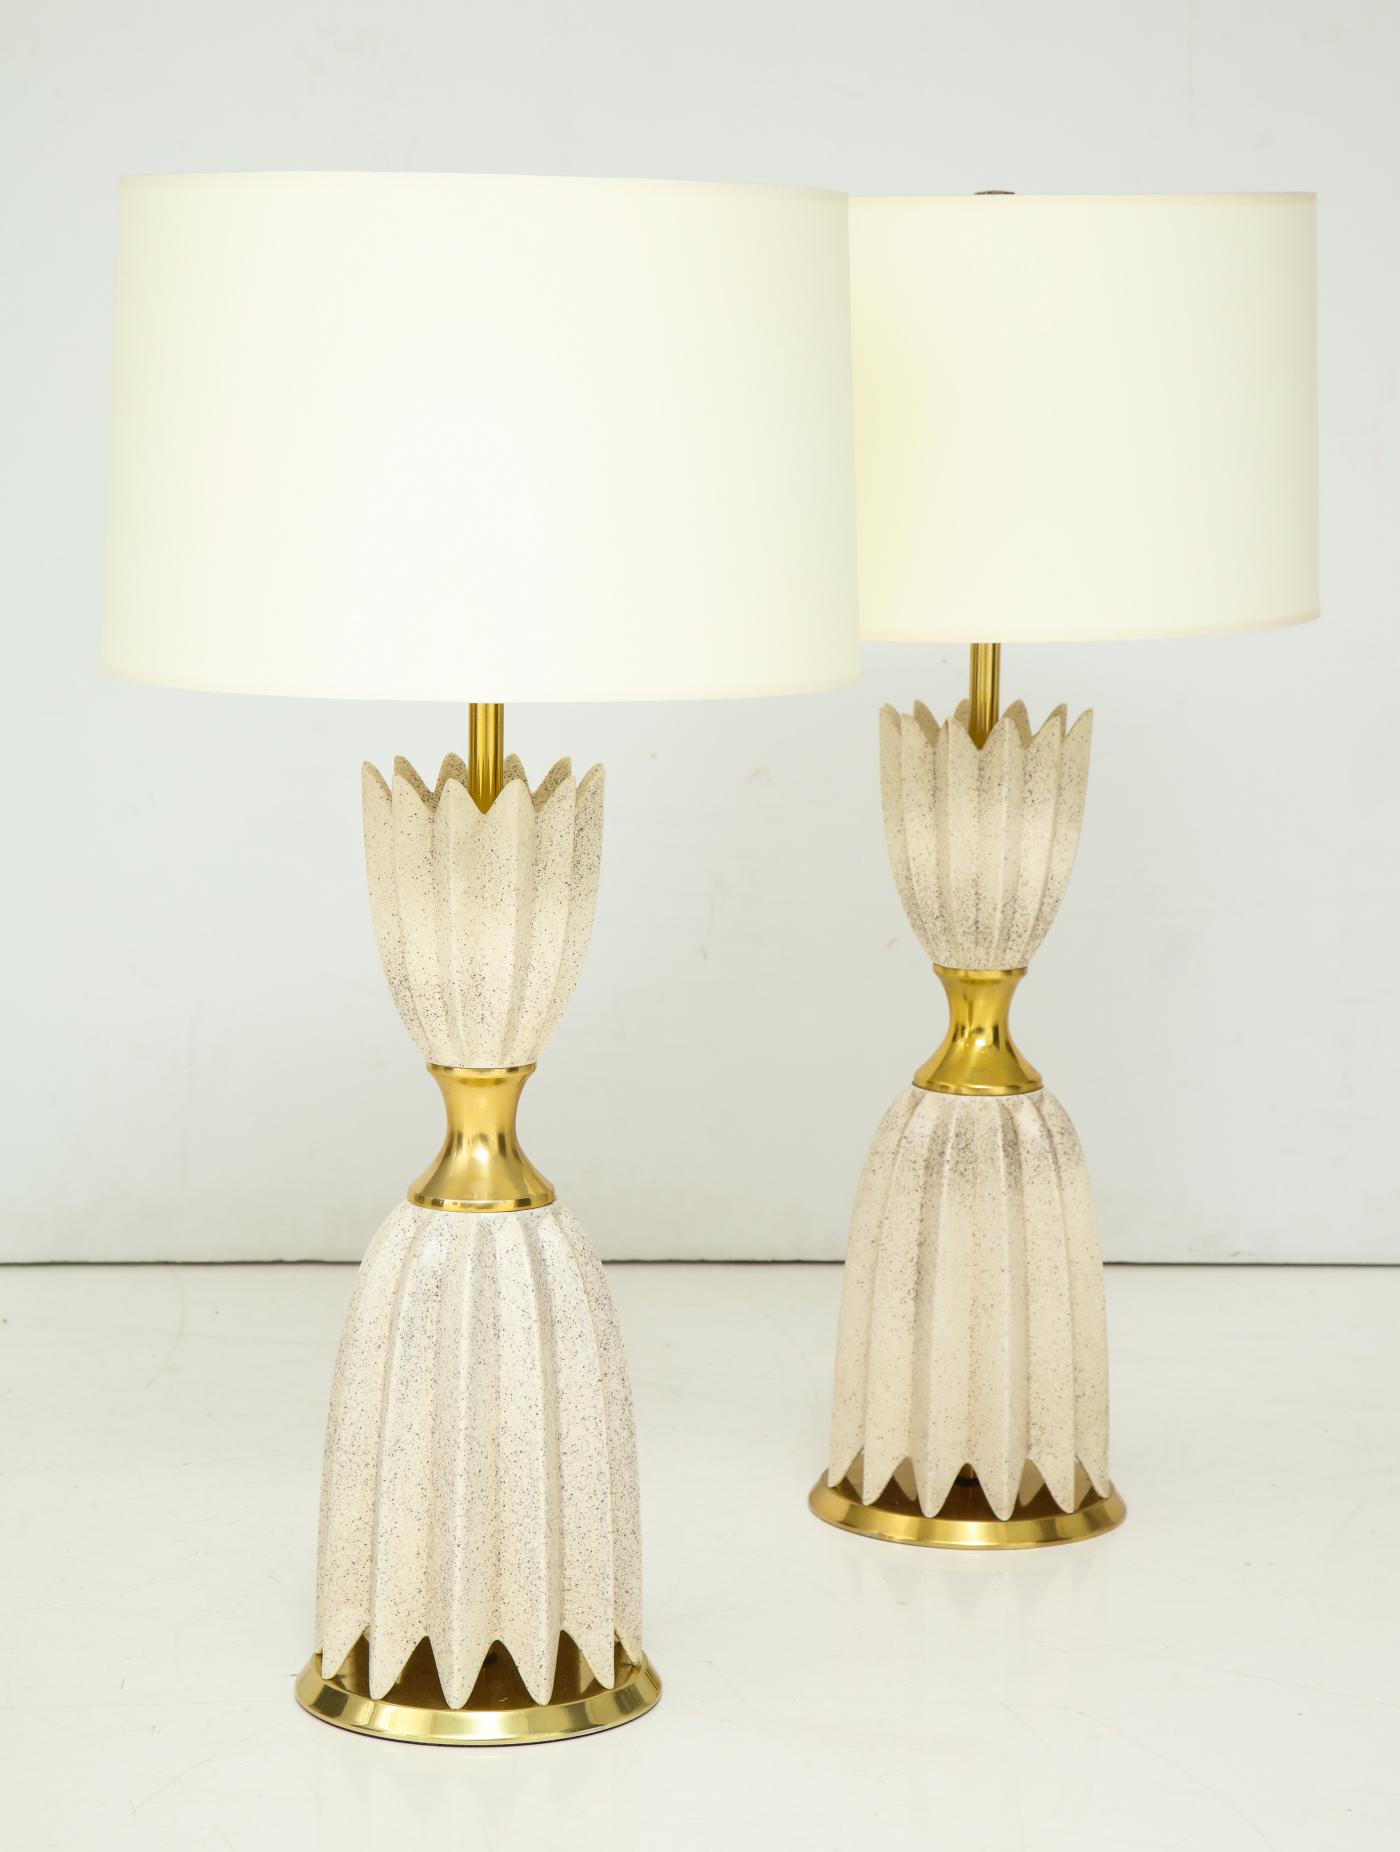 Pair of Ceramic Lamps by Gerald Thurston for Lightolier.